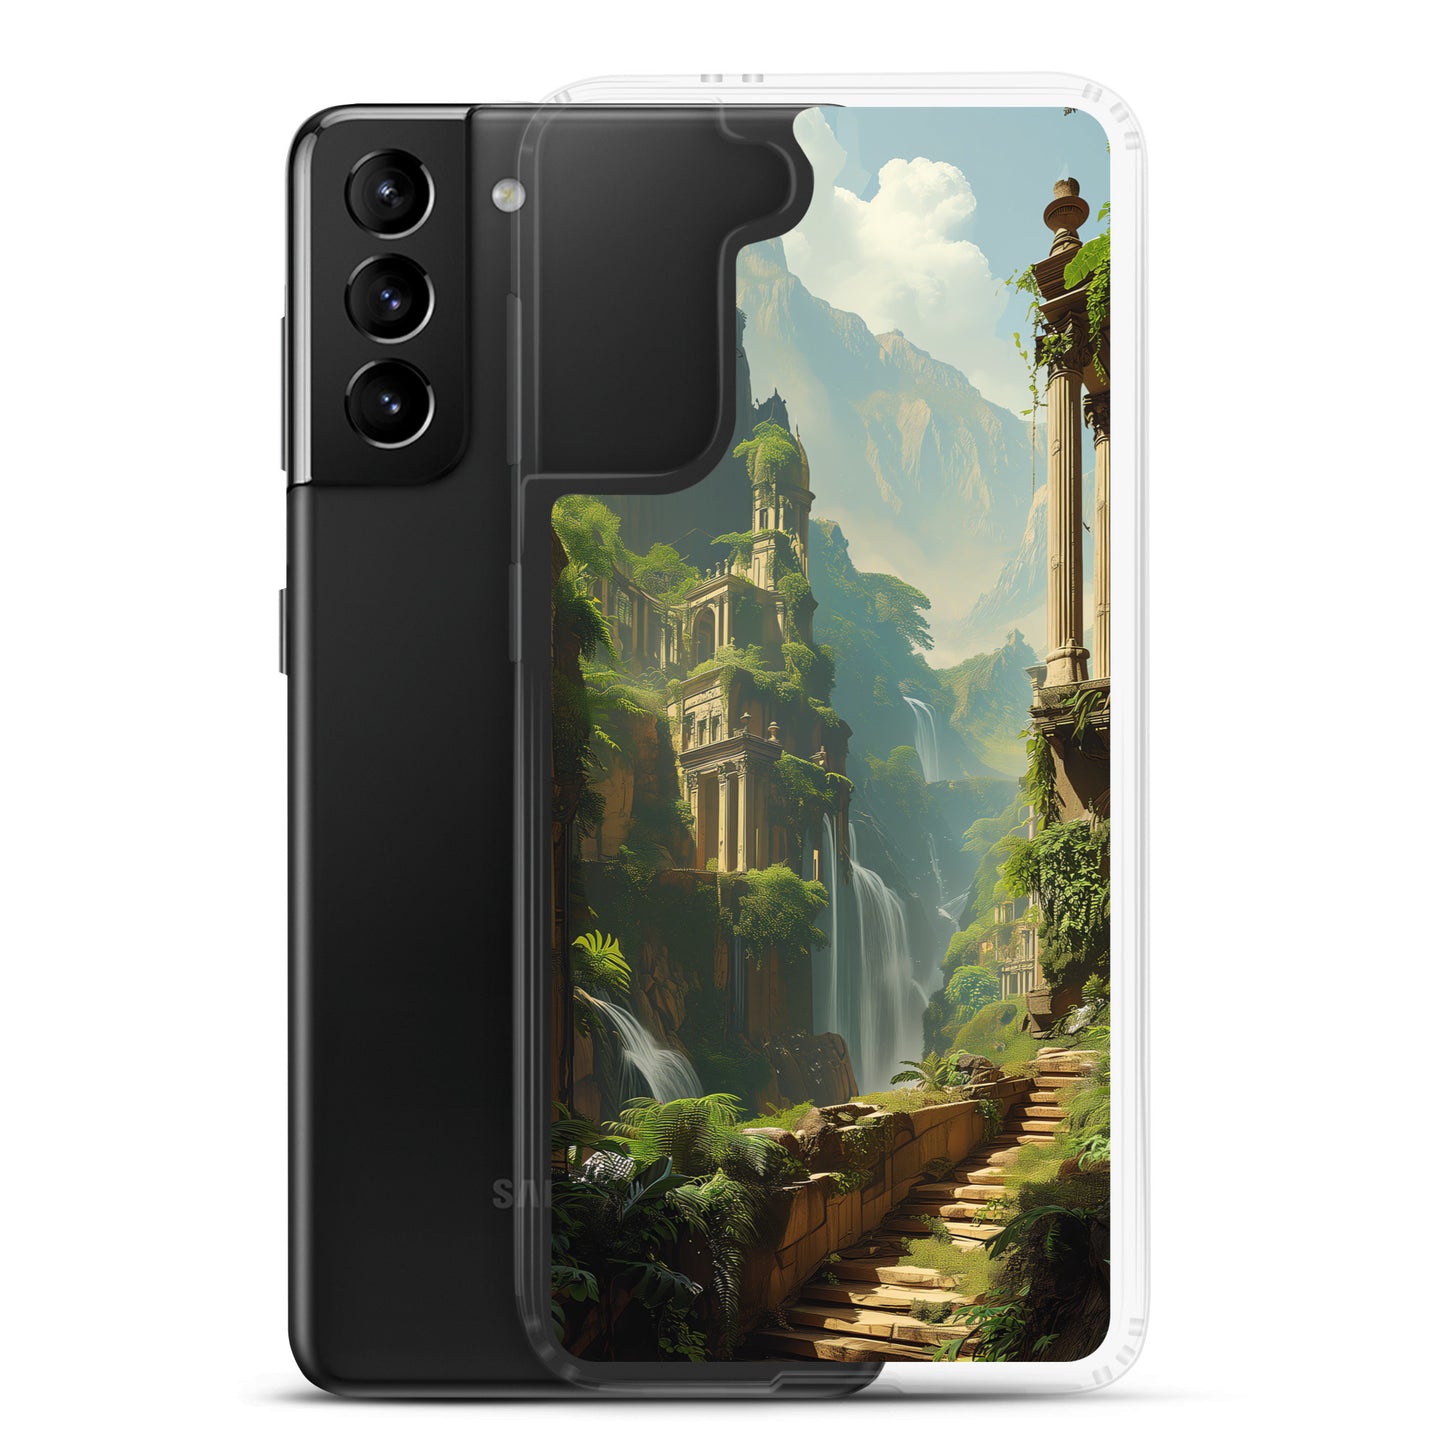 Samsung Case - Lost Temples of the Verdure